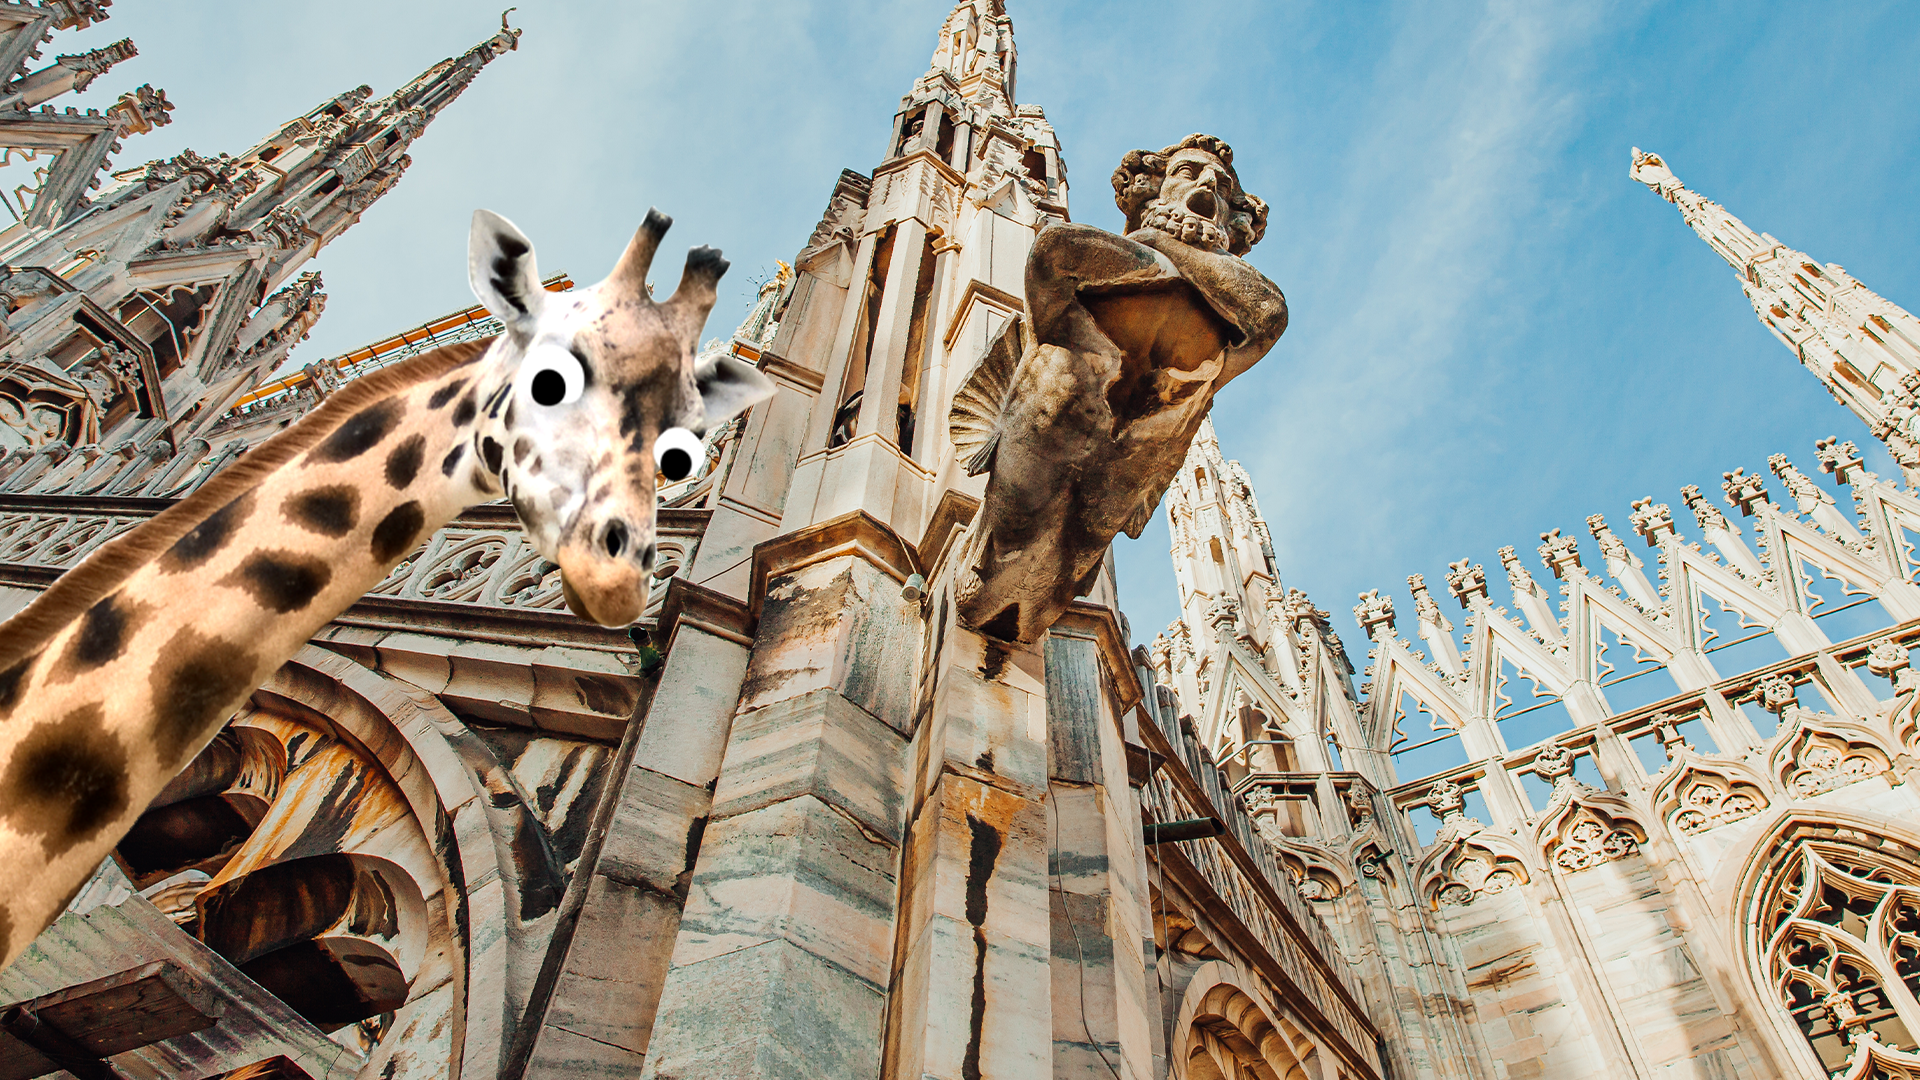 Looking up at cathedral with derpy giraffe